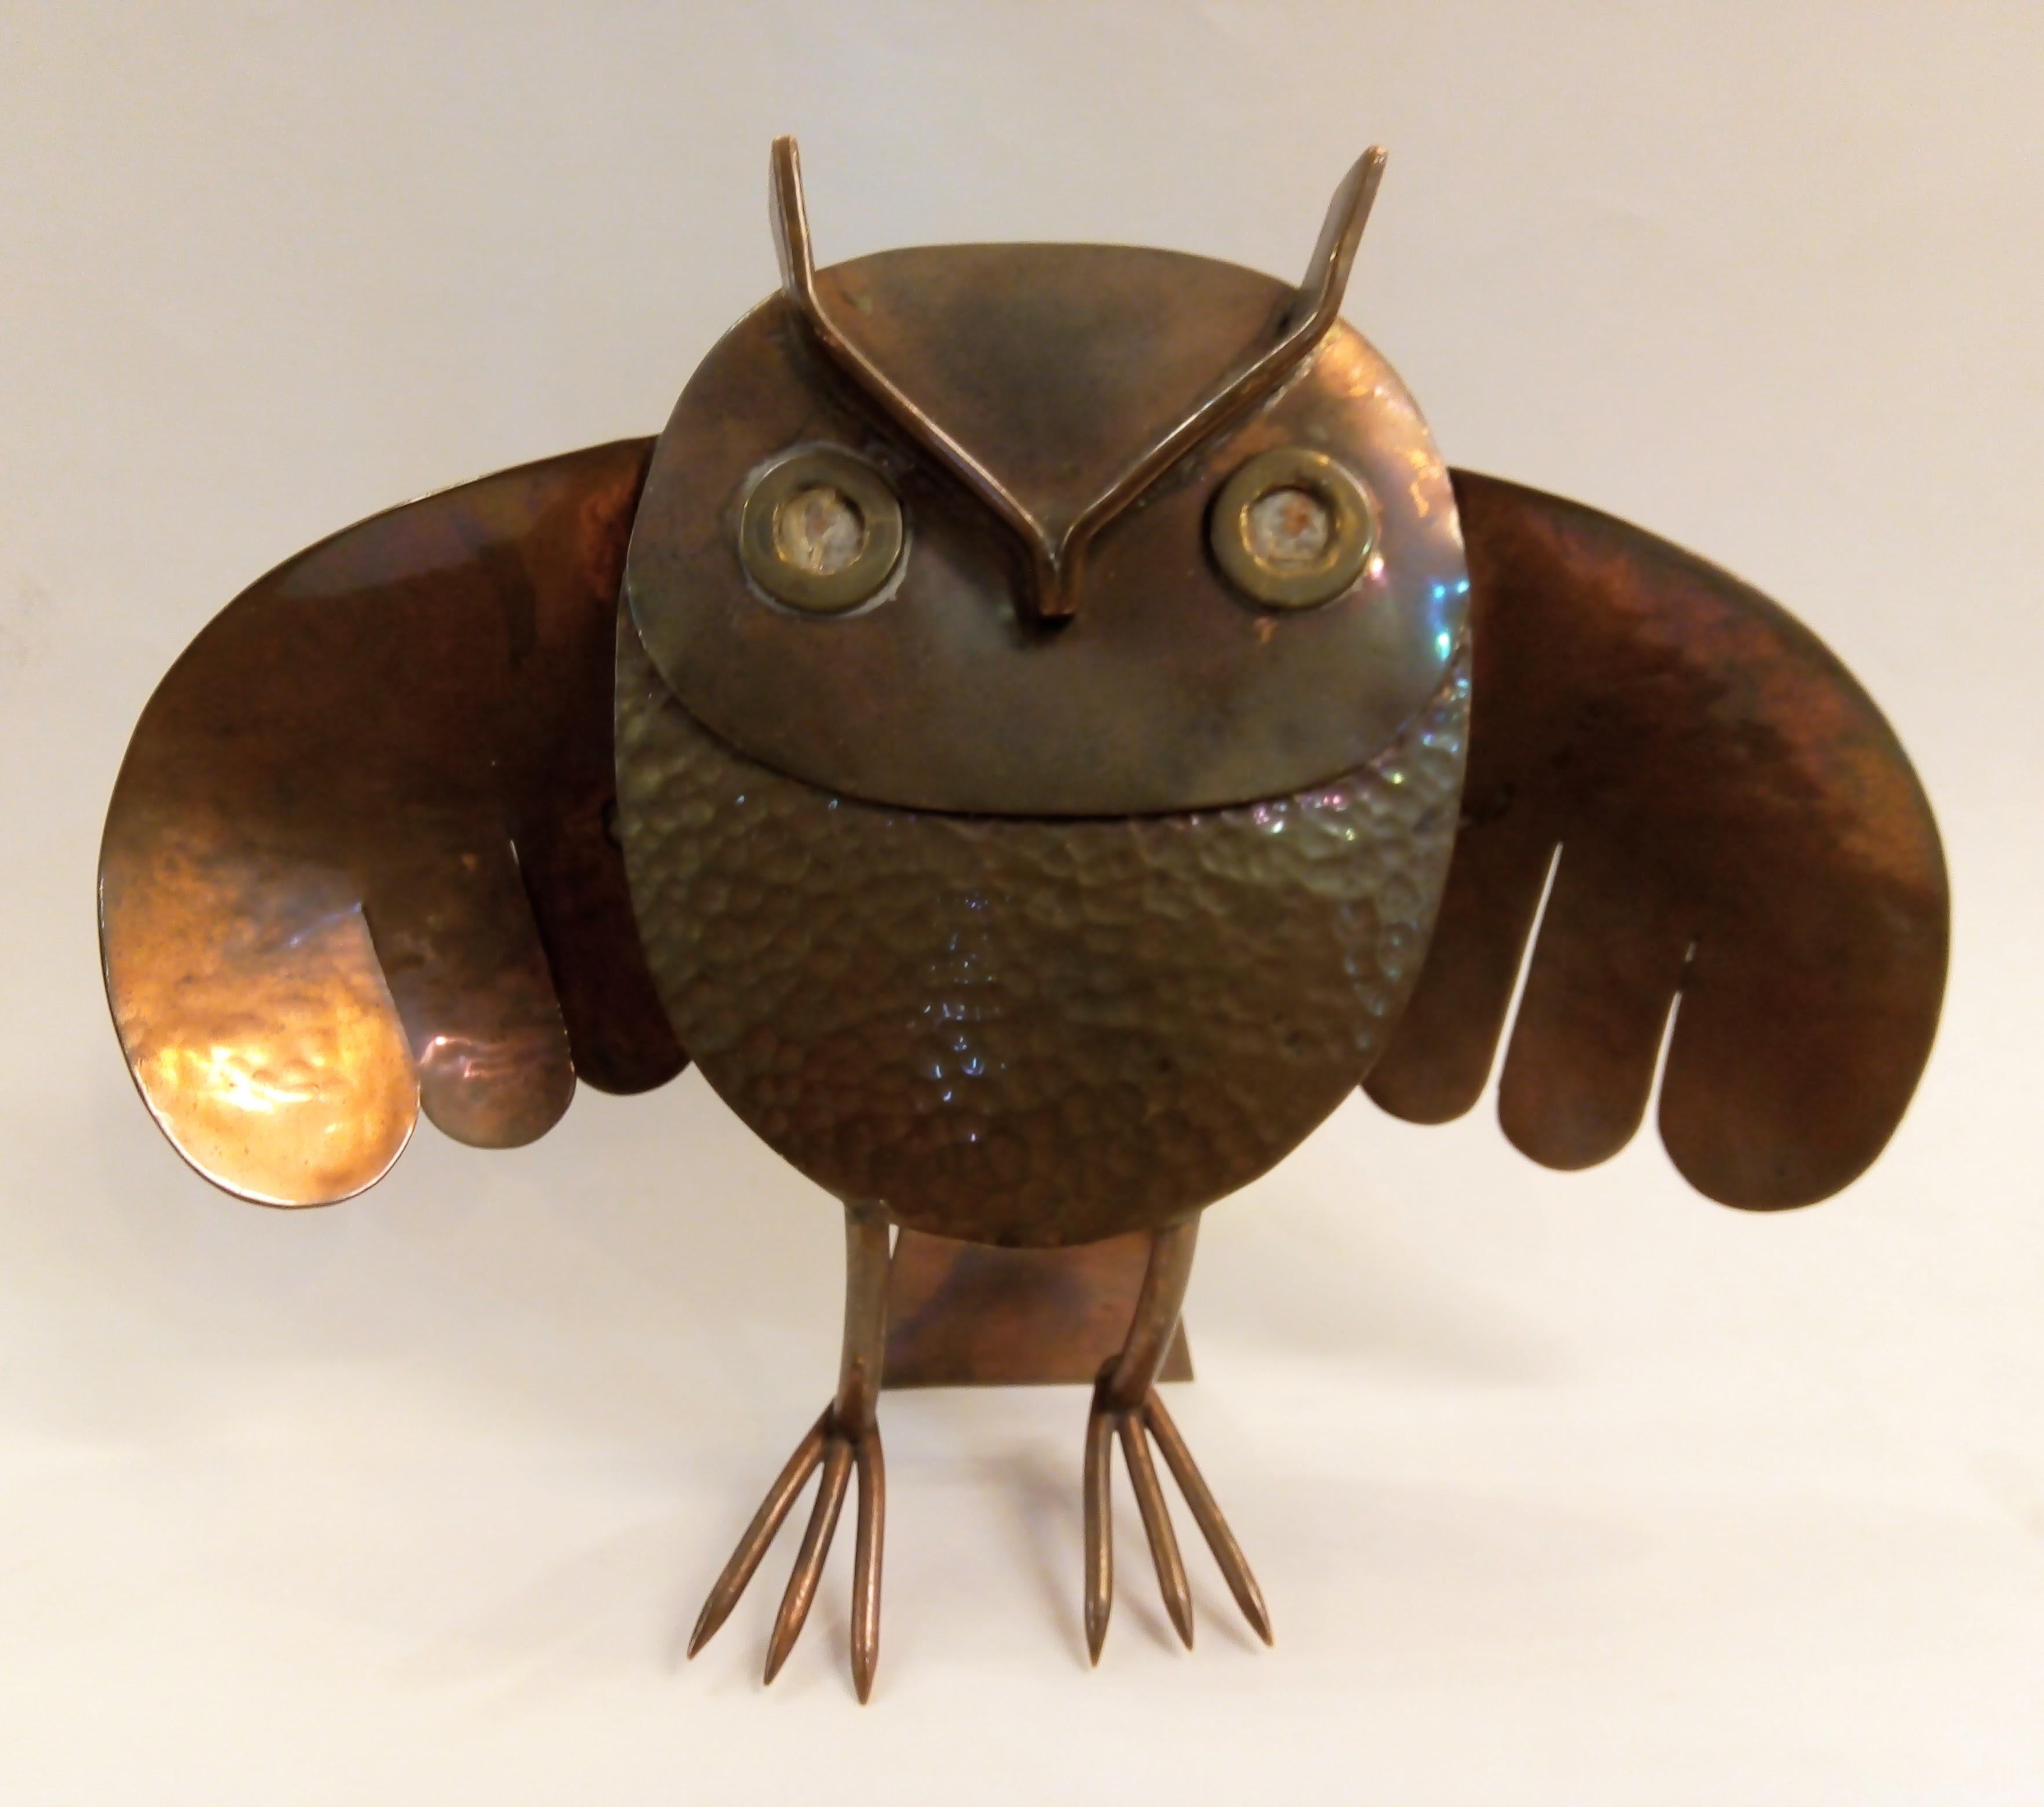 Beautifully handcrafted owl with open wings made by Los Castillo workshop in Taxco, Guerrero, Mexico. It is manufactured by hand in oxidized and hammered copper and welded together.  It is signed 